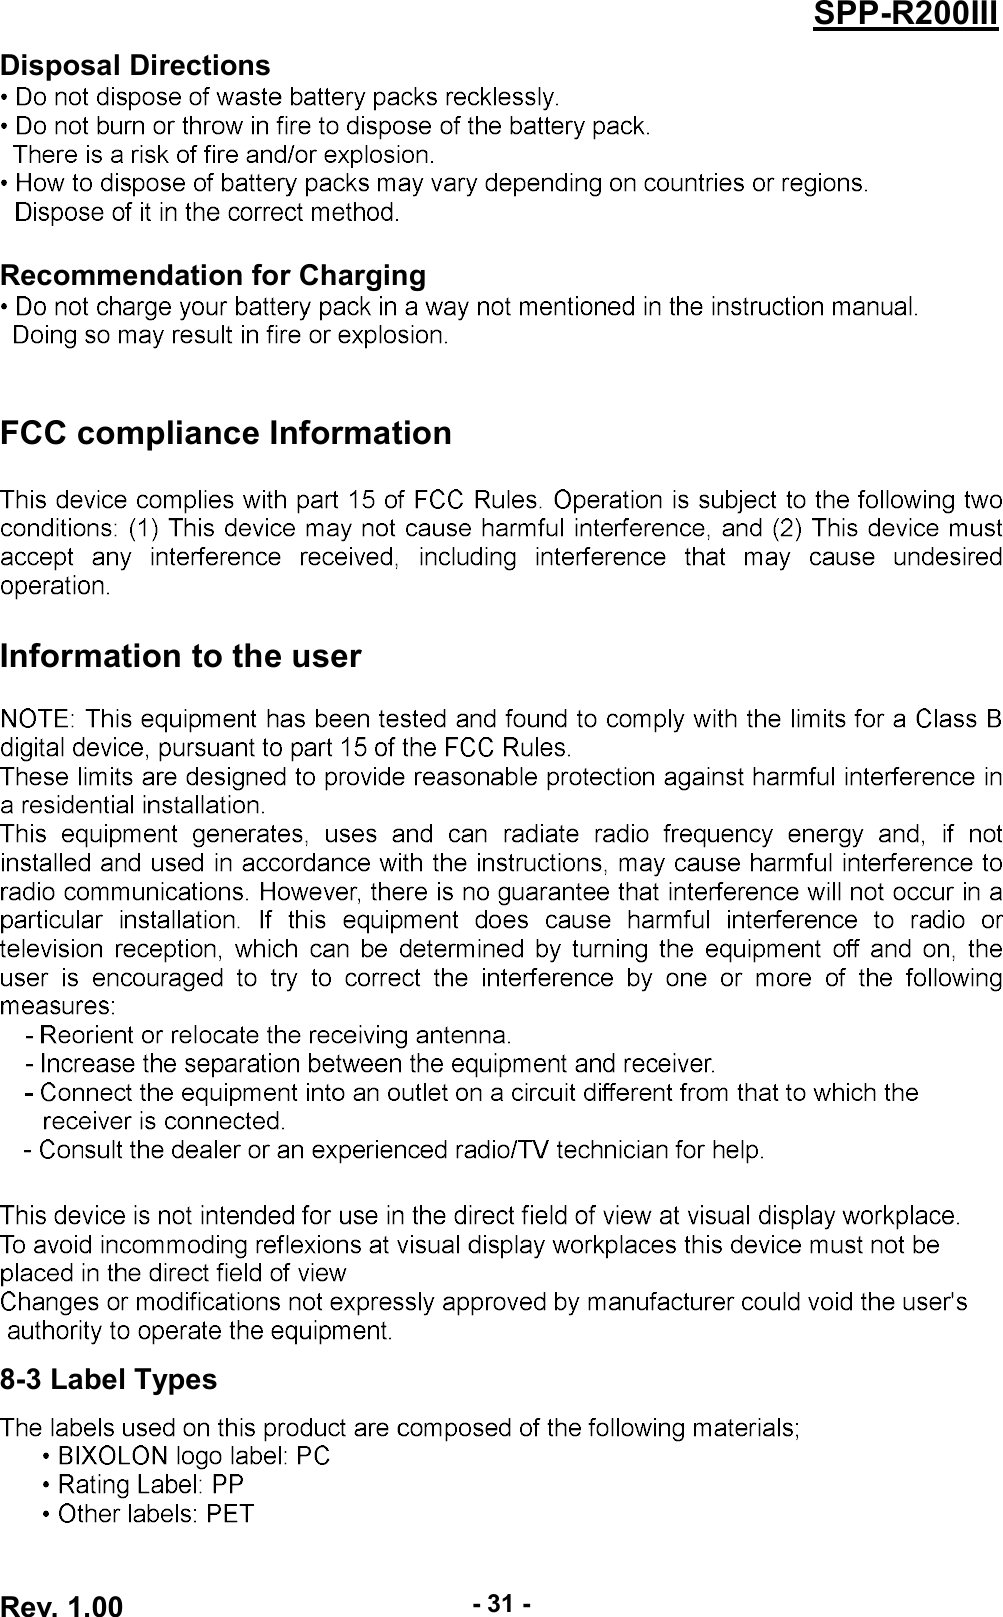 Rev. 1.00-31-SPP-R200IIIDisposal DirectionsRecommendation for ChargingFCC compliance InformationInformation to the user8-3 Label Types